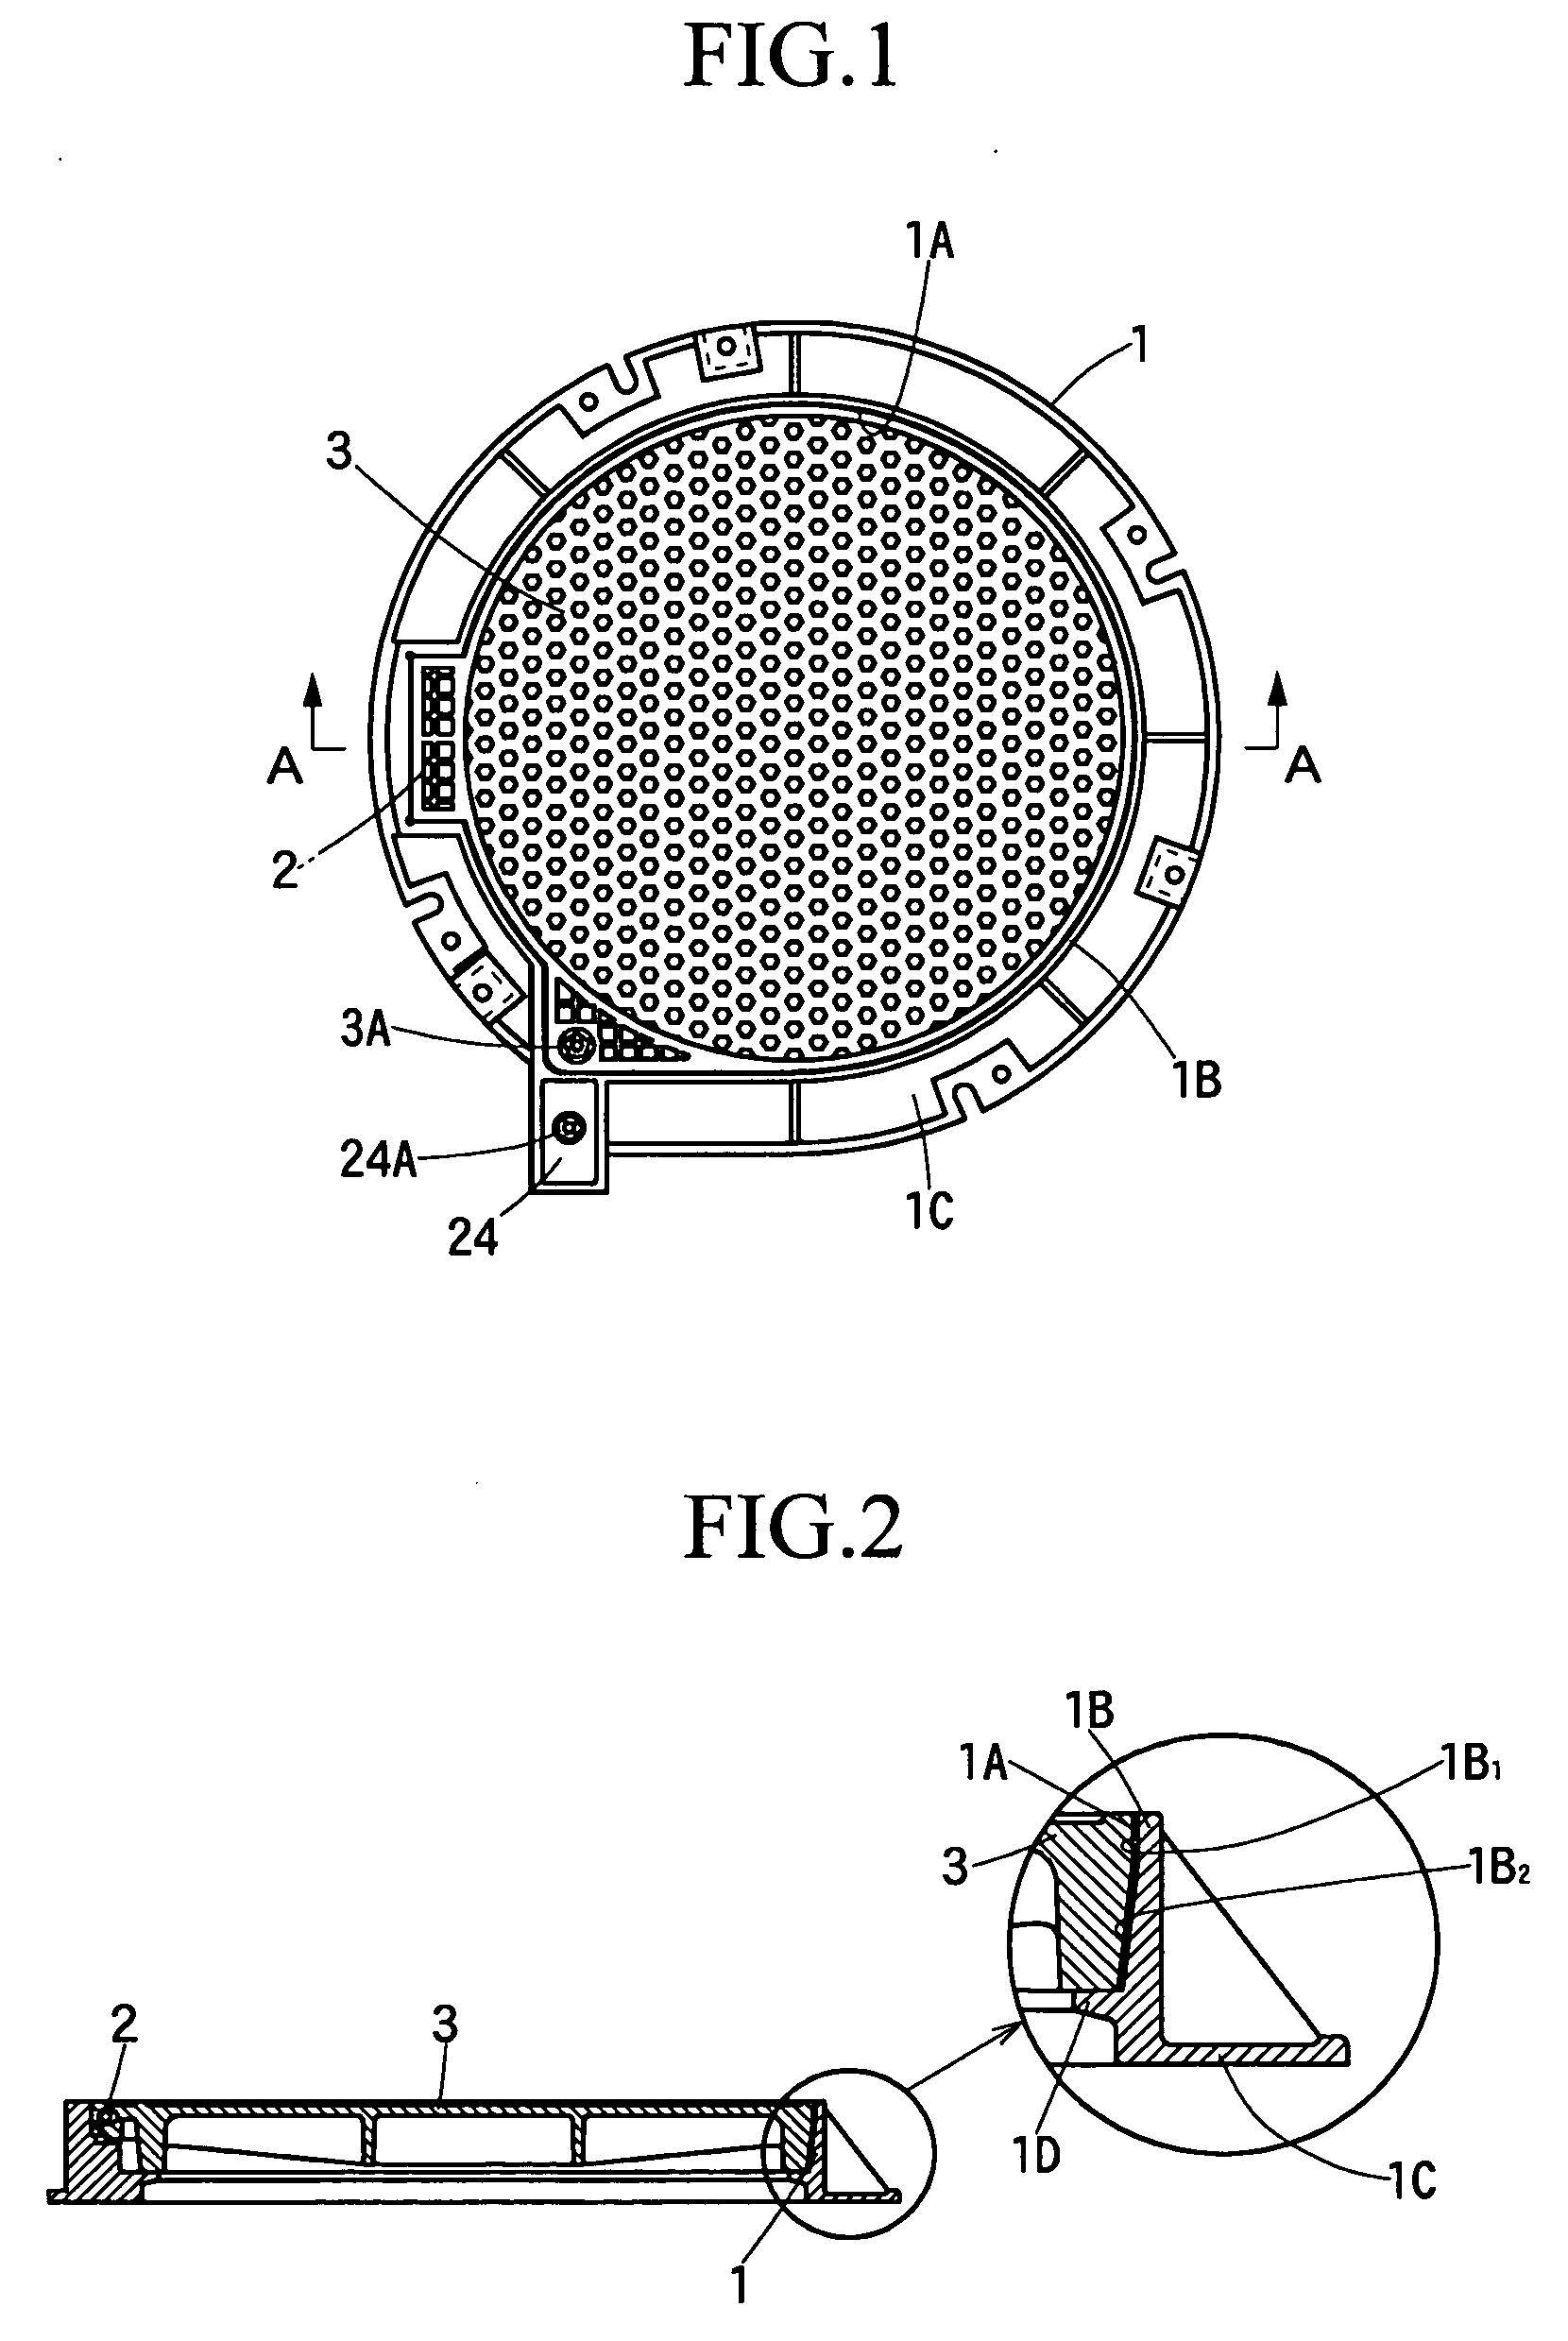 Opening/Closing Device for Manhole Cover